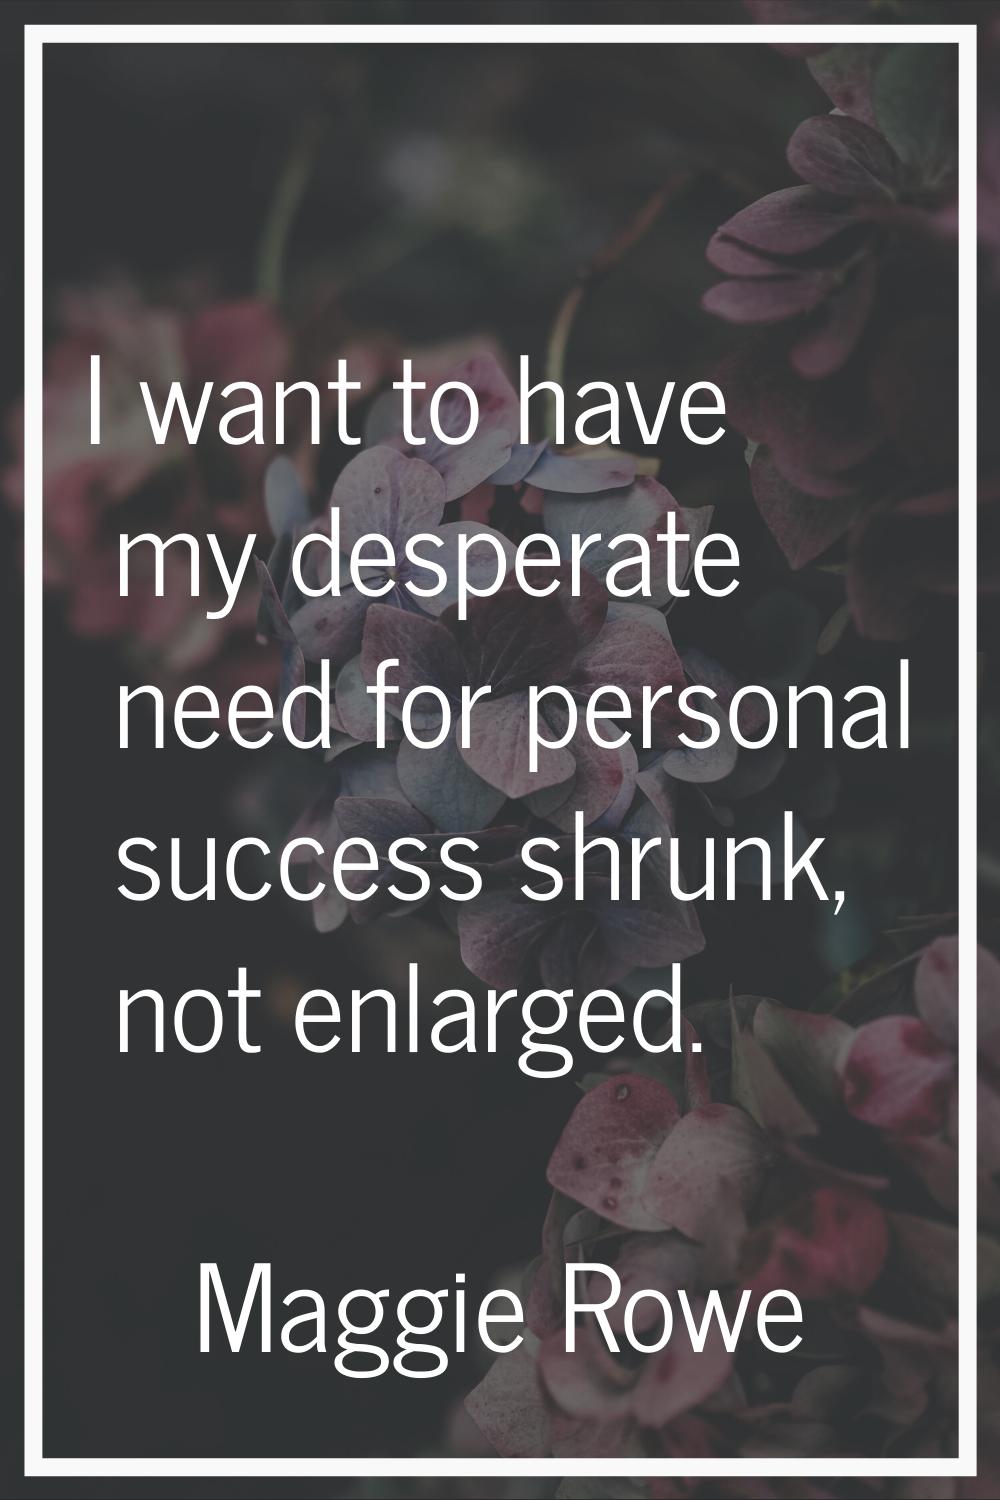 I want to have my desperate need for personal success shrunk, not enlarged.